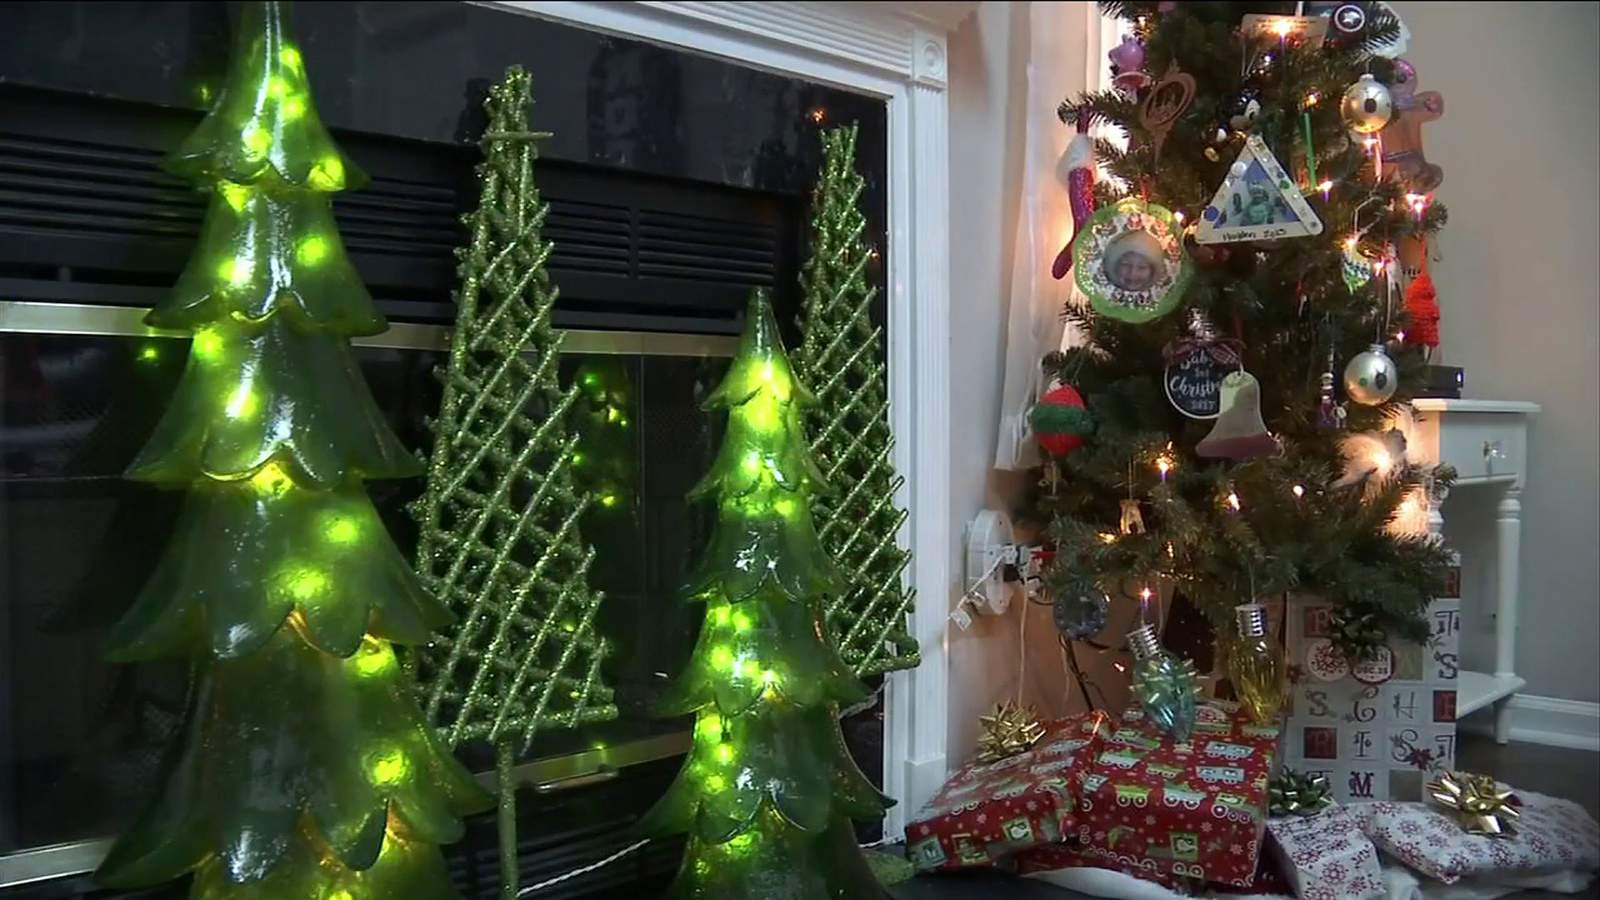 Christmas lights cause 770 house fires every year, National Fire Protection Association reports